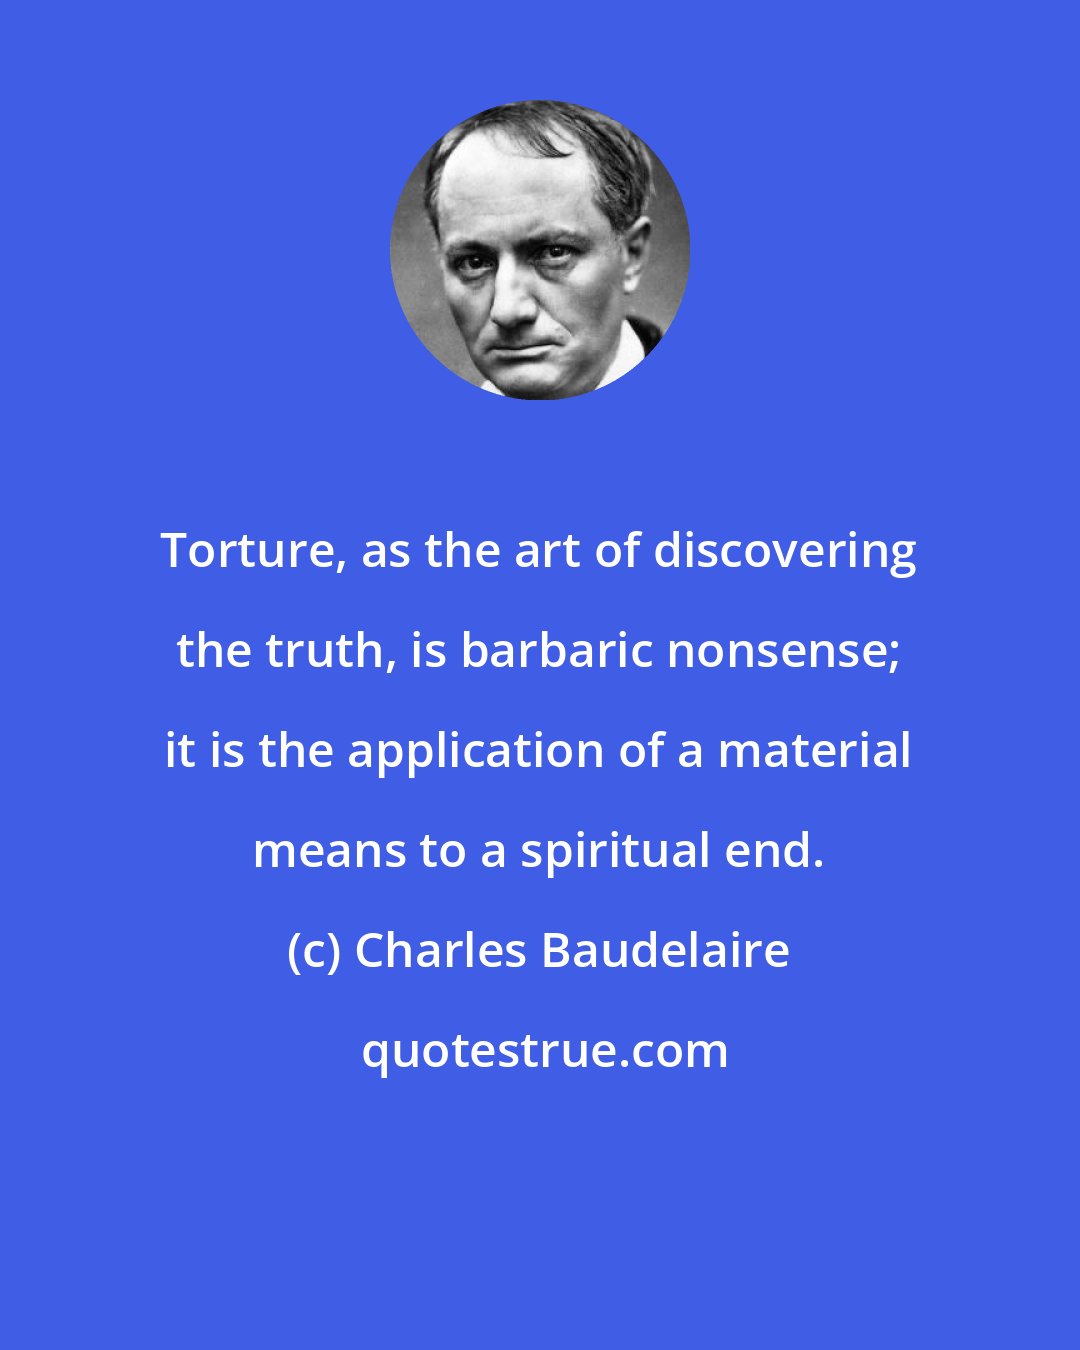 Charles Baudelaire: Torture, as the art of discovering the truth, is barbaric nonsense; it is the application of a material means to a spiritual end.